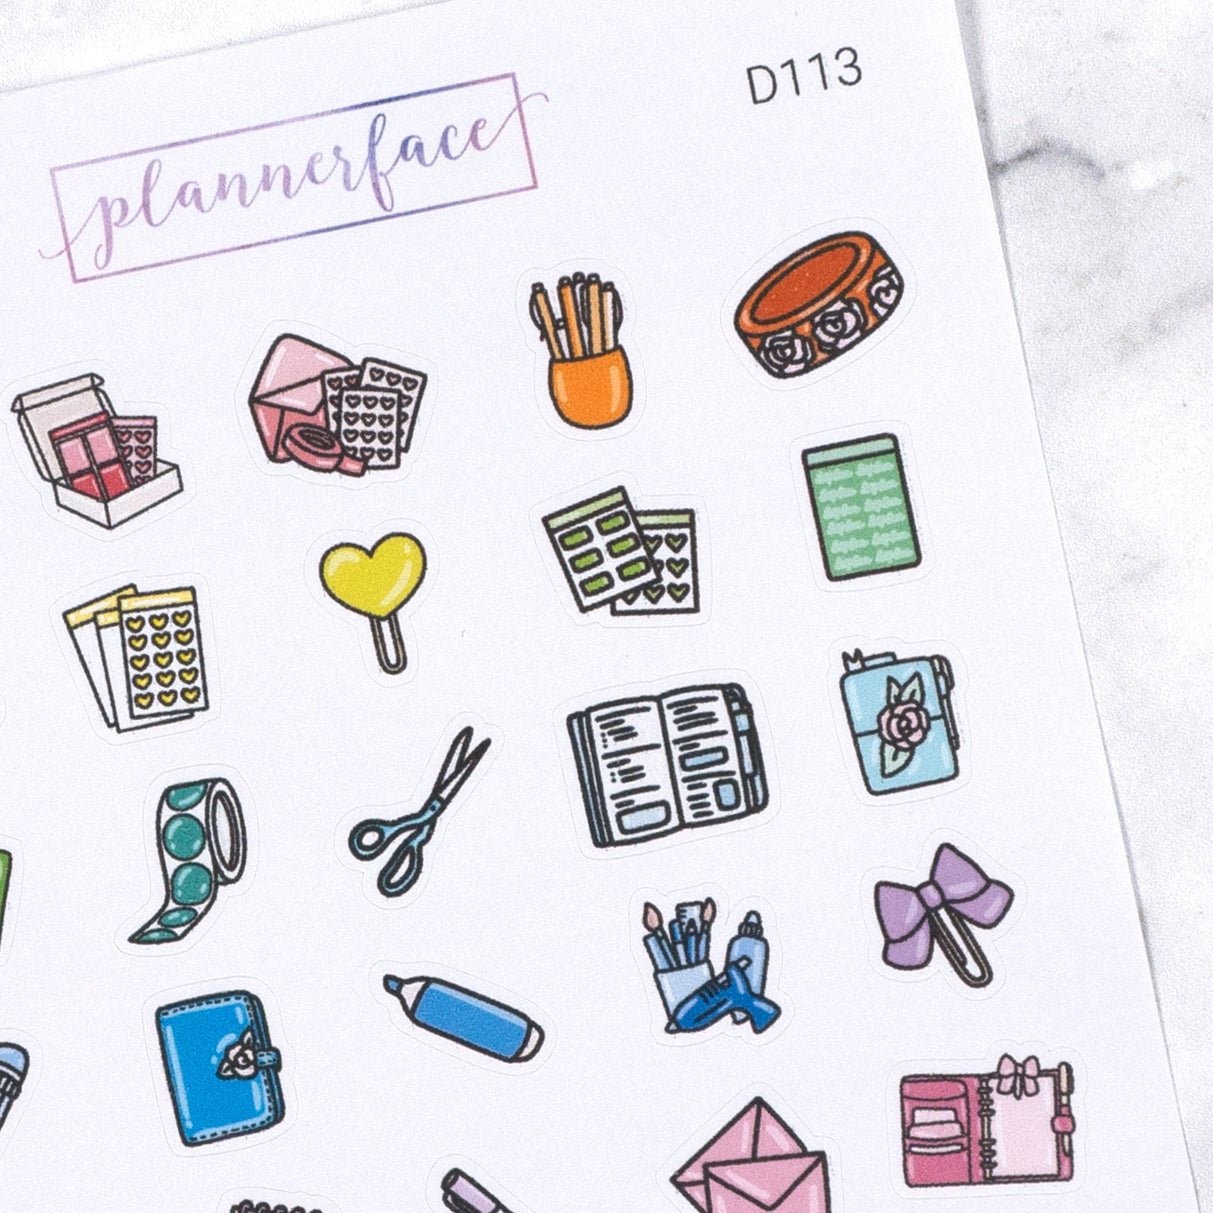 Planning Multicolour Doodle Sampler by Plannerface